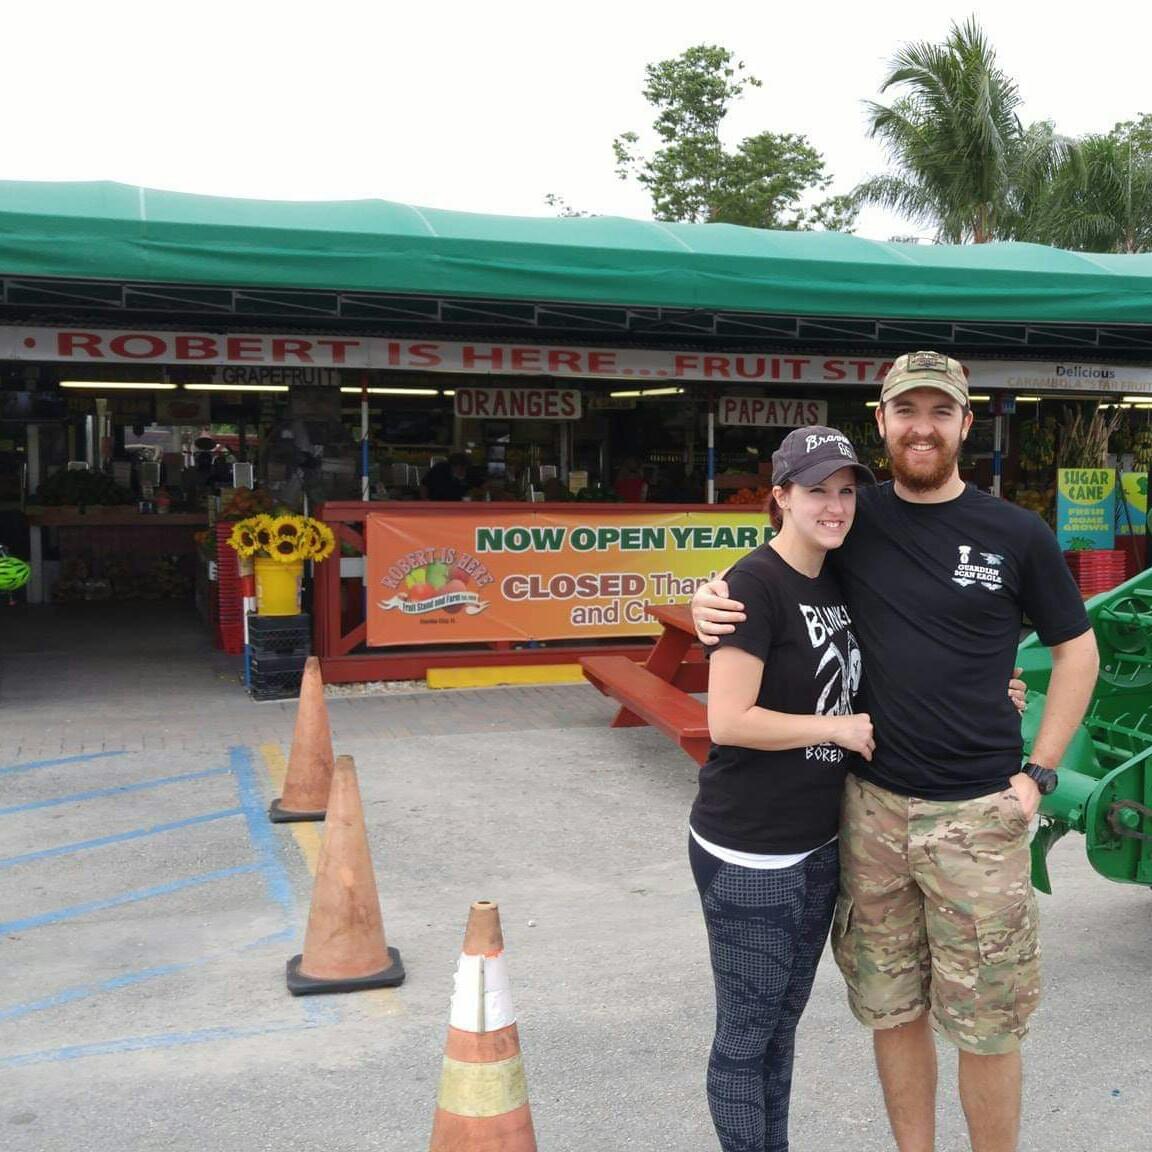 Now, Key West is a regular trip for us now! Got to stop at "Robert is Here" fruit stand every time!